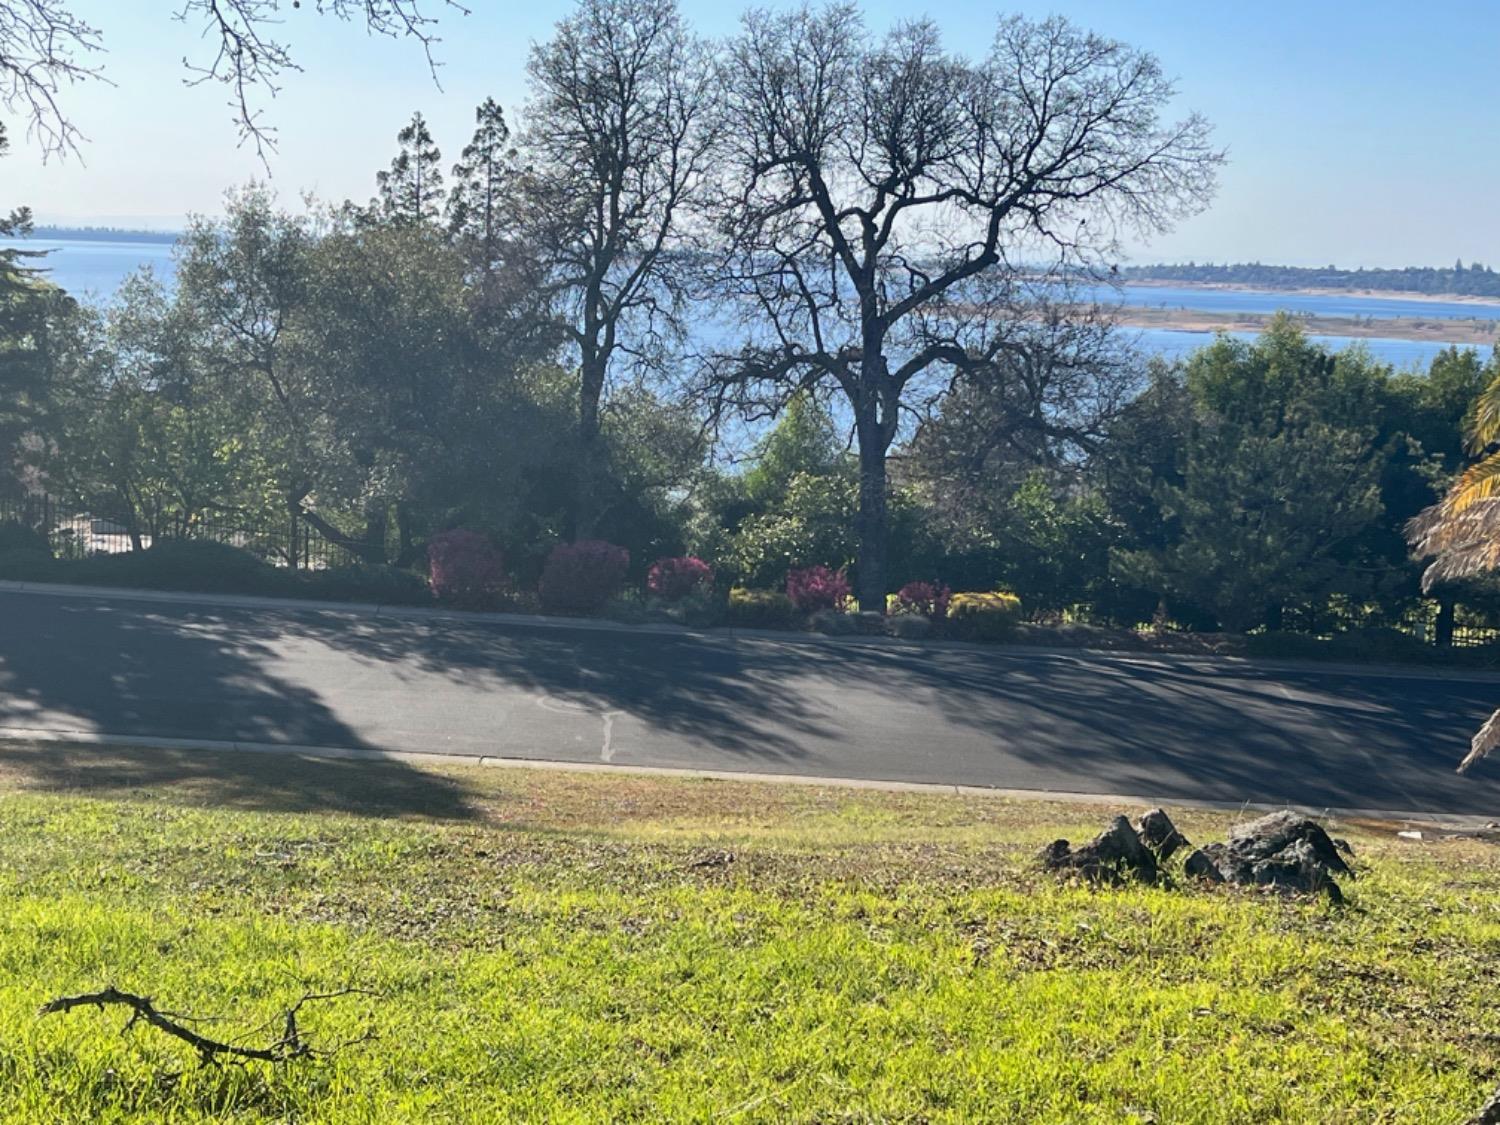 One of the last remaining premier lots in The Summit, one of the most desirable gated communities in El Dorado Hills. Excellent schools.   First time on market in 20 years. Entire lot is easily walkable.  Trees, few granite outcroppings on side of lot.  Folsom Lake views. Sit on the front deck and watch the beautiful sunsets over the lake.  The Summit has tennis courts, playground, BBQ area and easy access to Folsom Lake trails. Wide, sweeping streets, wildlife, many trees. Low HOA, no Mello-Roos.  Water/sewer paid.